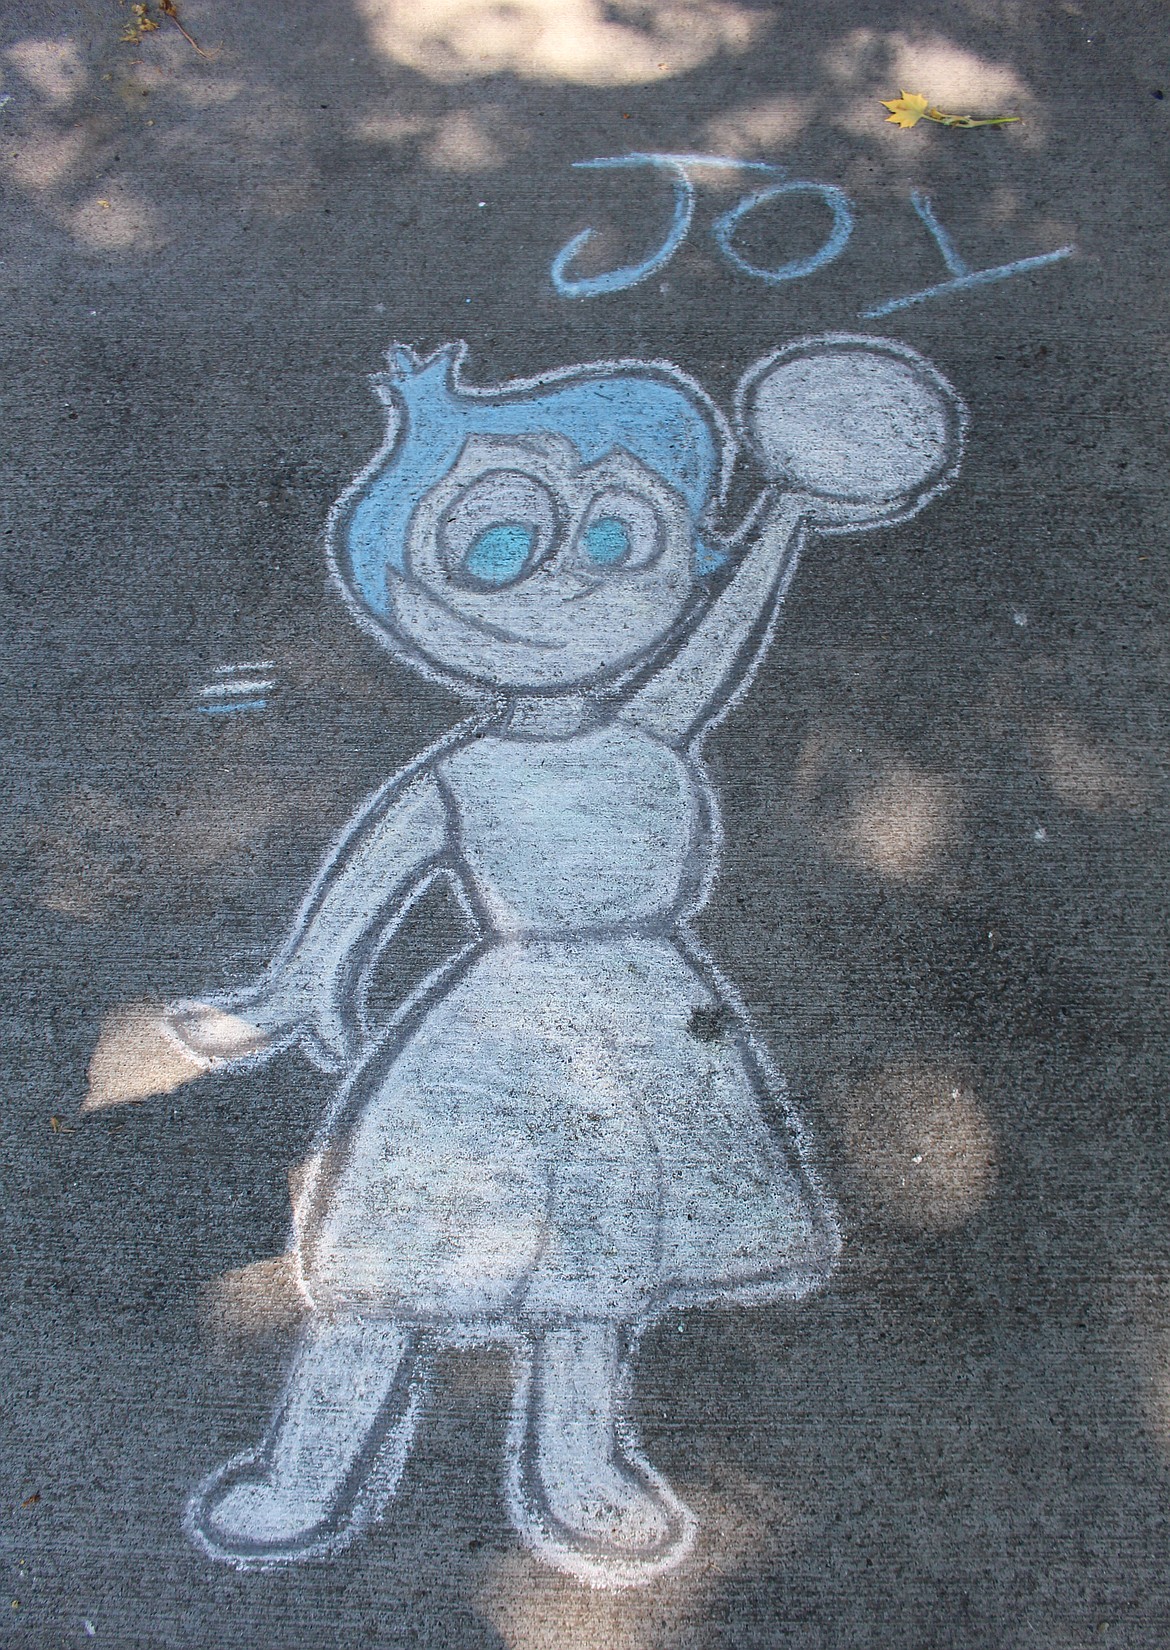 A chalk drawing of a character from the Pixar movie, "Inside Out," is one of a number of drawings on the driveway outside Tessa Pyle's family home in Moses Lake.